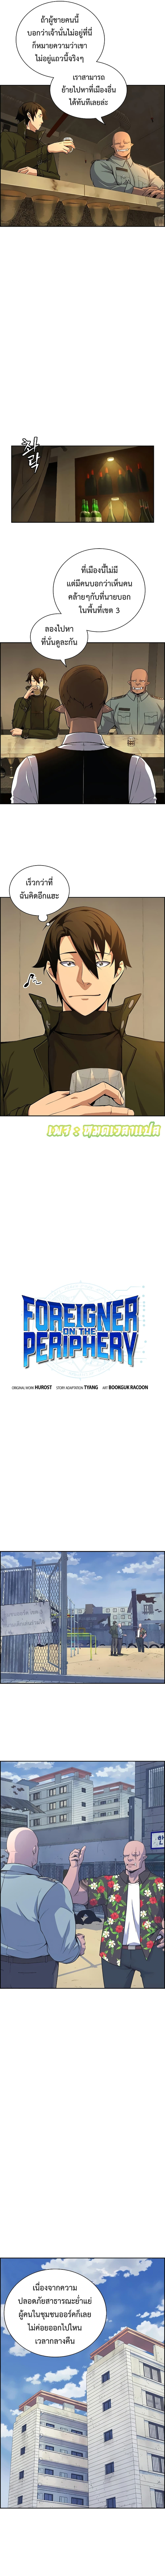 Foreigner on the Periphery 5 02